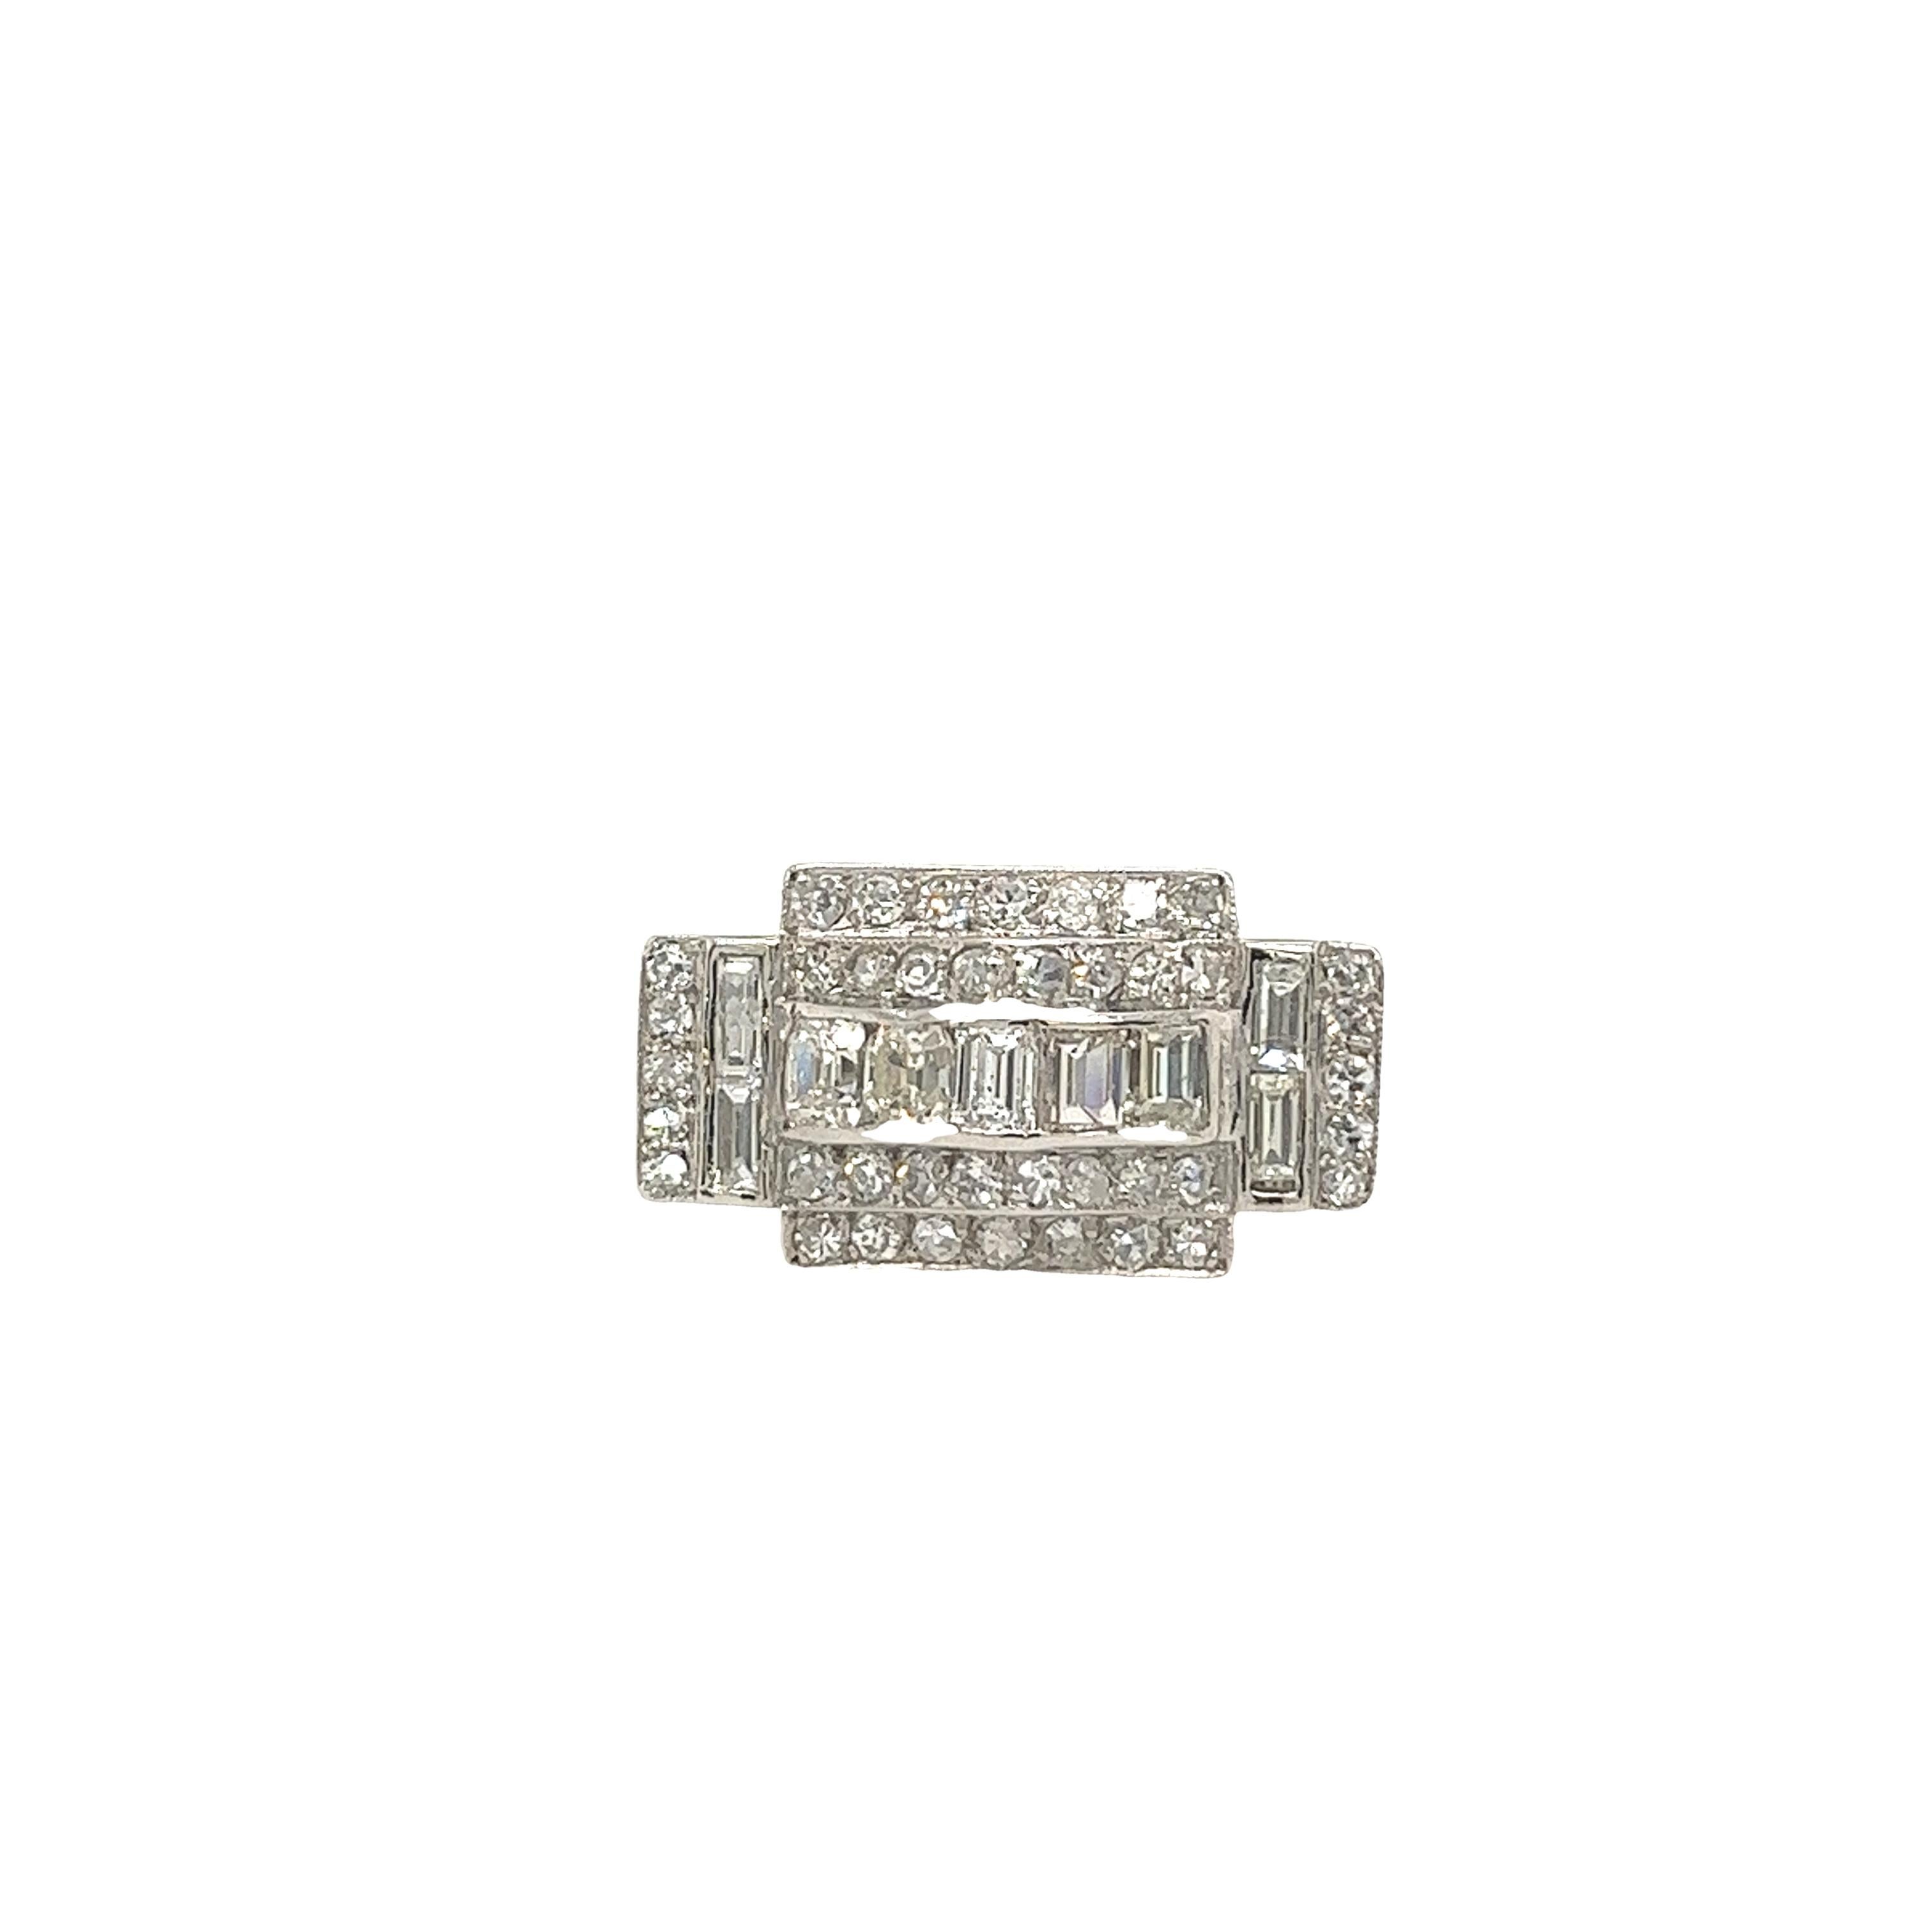 An elegant and unique diamond dress ring set with 5 emerald cut diamonds, 4 baguettes and 40 round brilliant cut natural diamonds, with a total diamond weight of 1.30ct in a platinum setting.

Total Diamond Weight: 1.30ct
Diamond Colour: G/H
Diamond